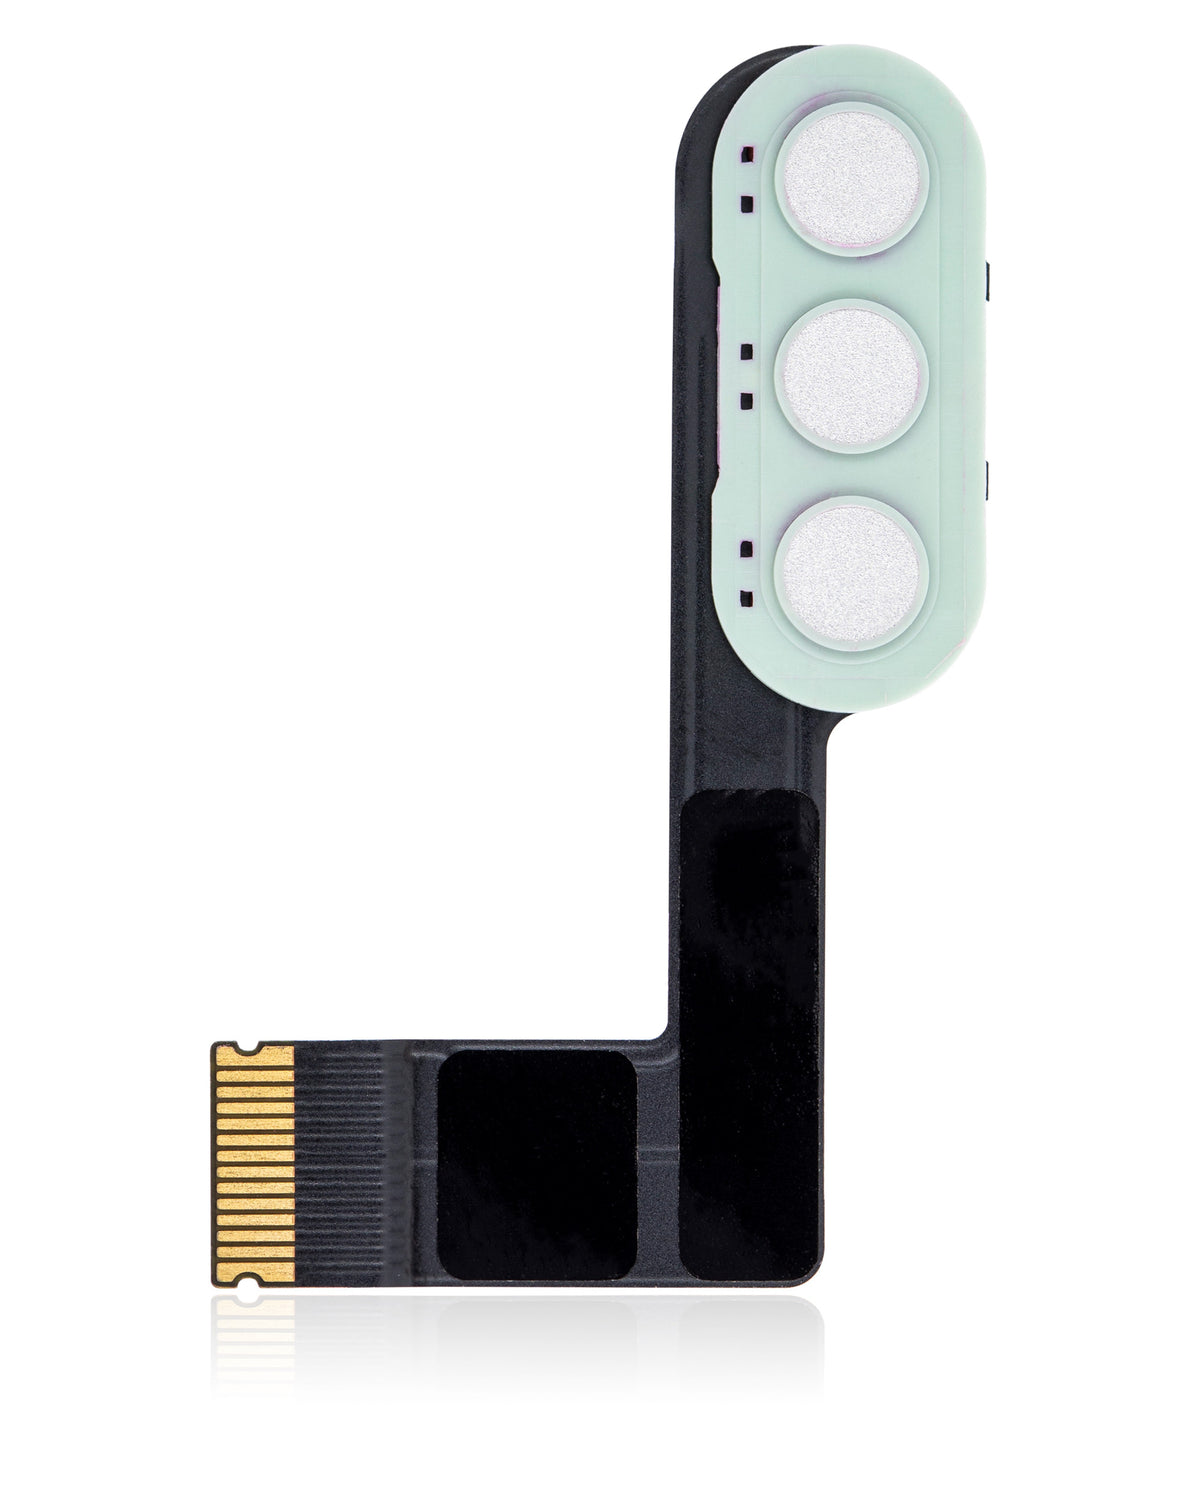 KEYBOARD FLEX CABLE COMPATIBLE FOR IPAD AIR 4 - GREEN